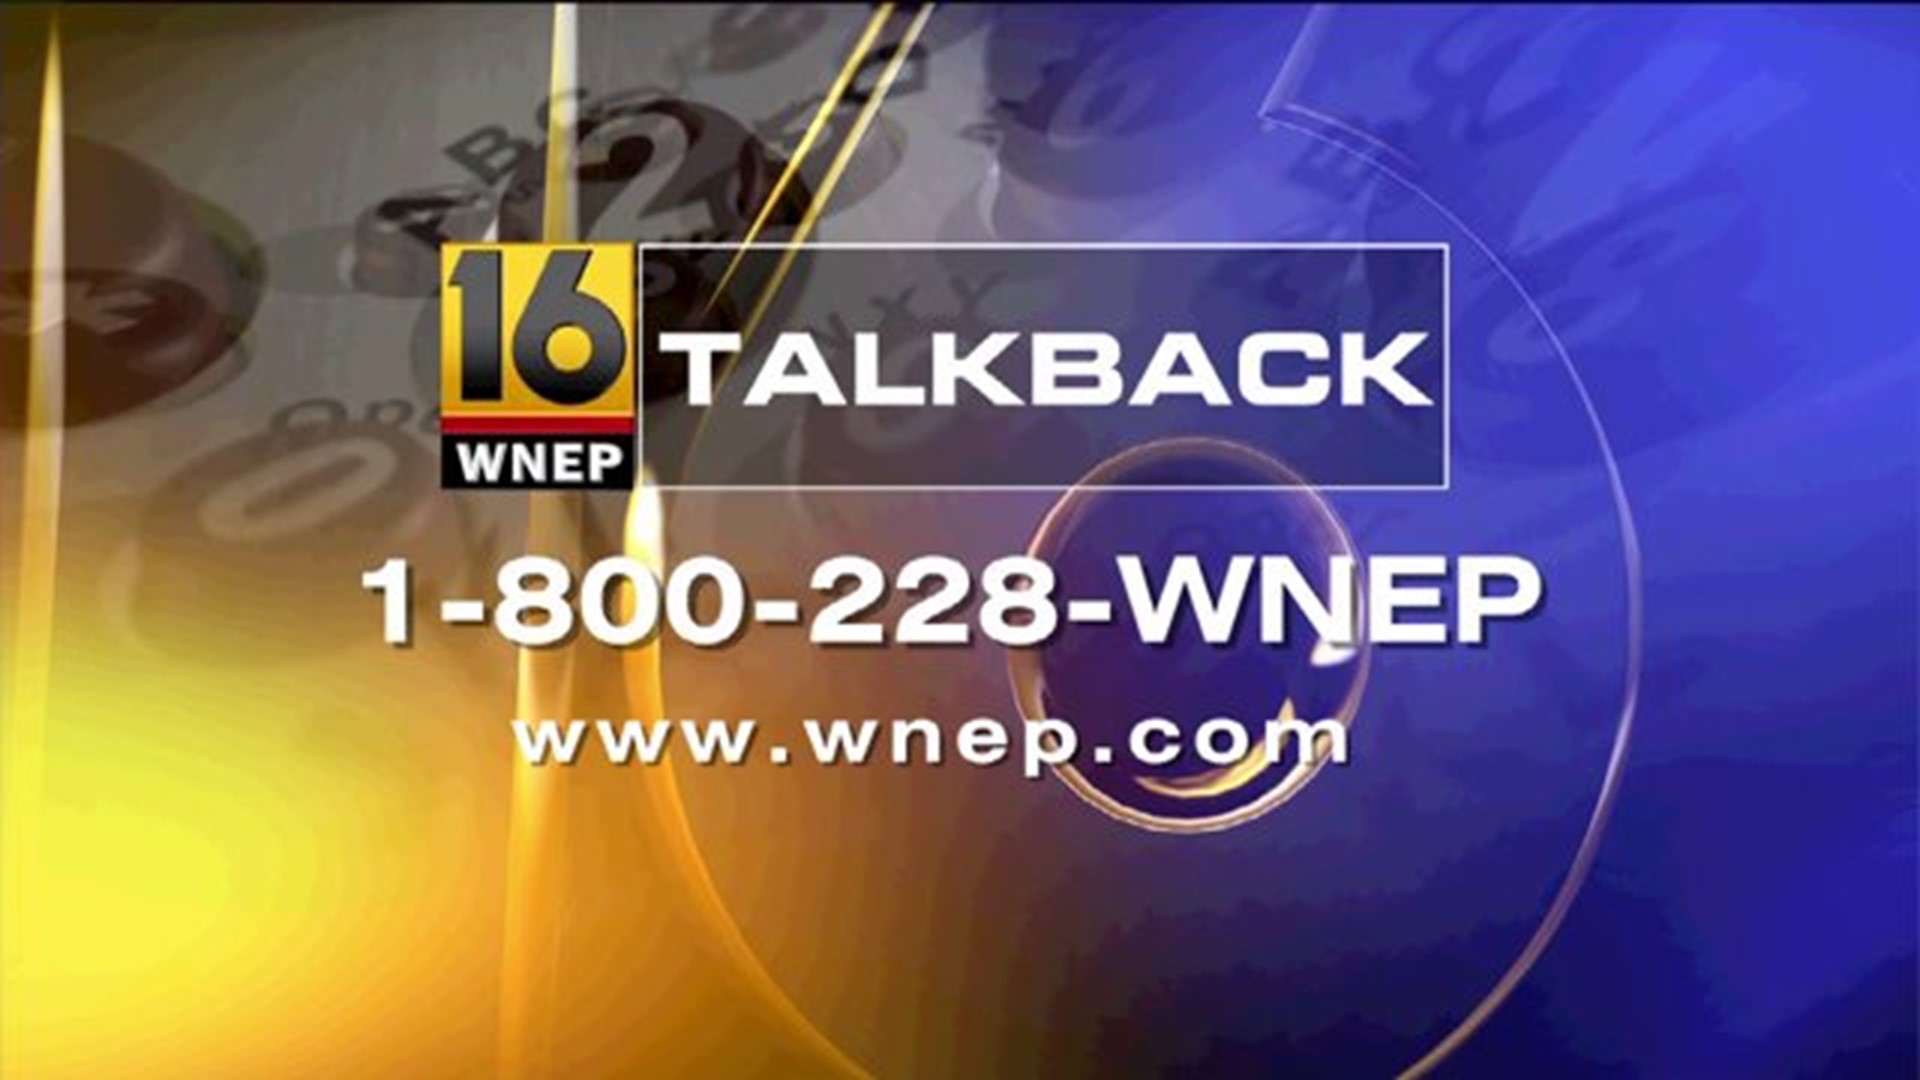 Talkback 16: State Police Requirements, Carnivals, Weather Alerts